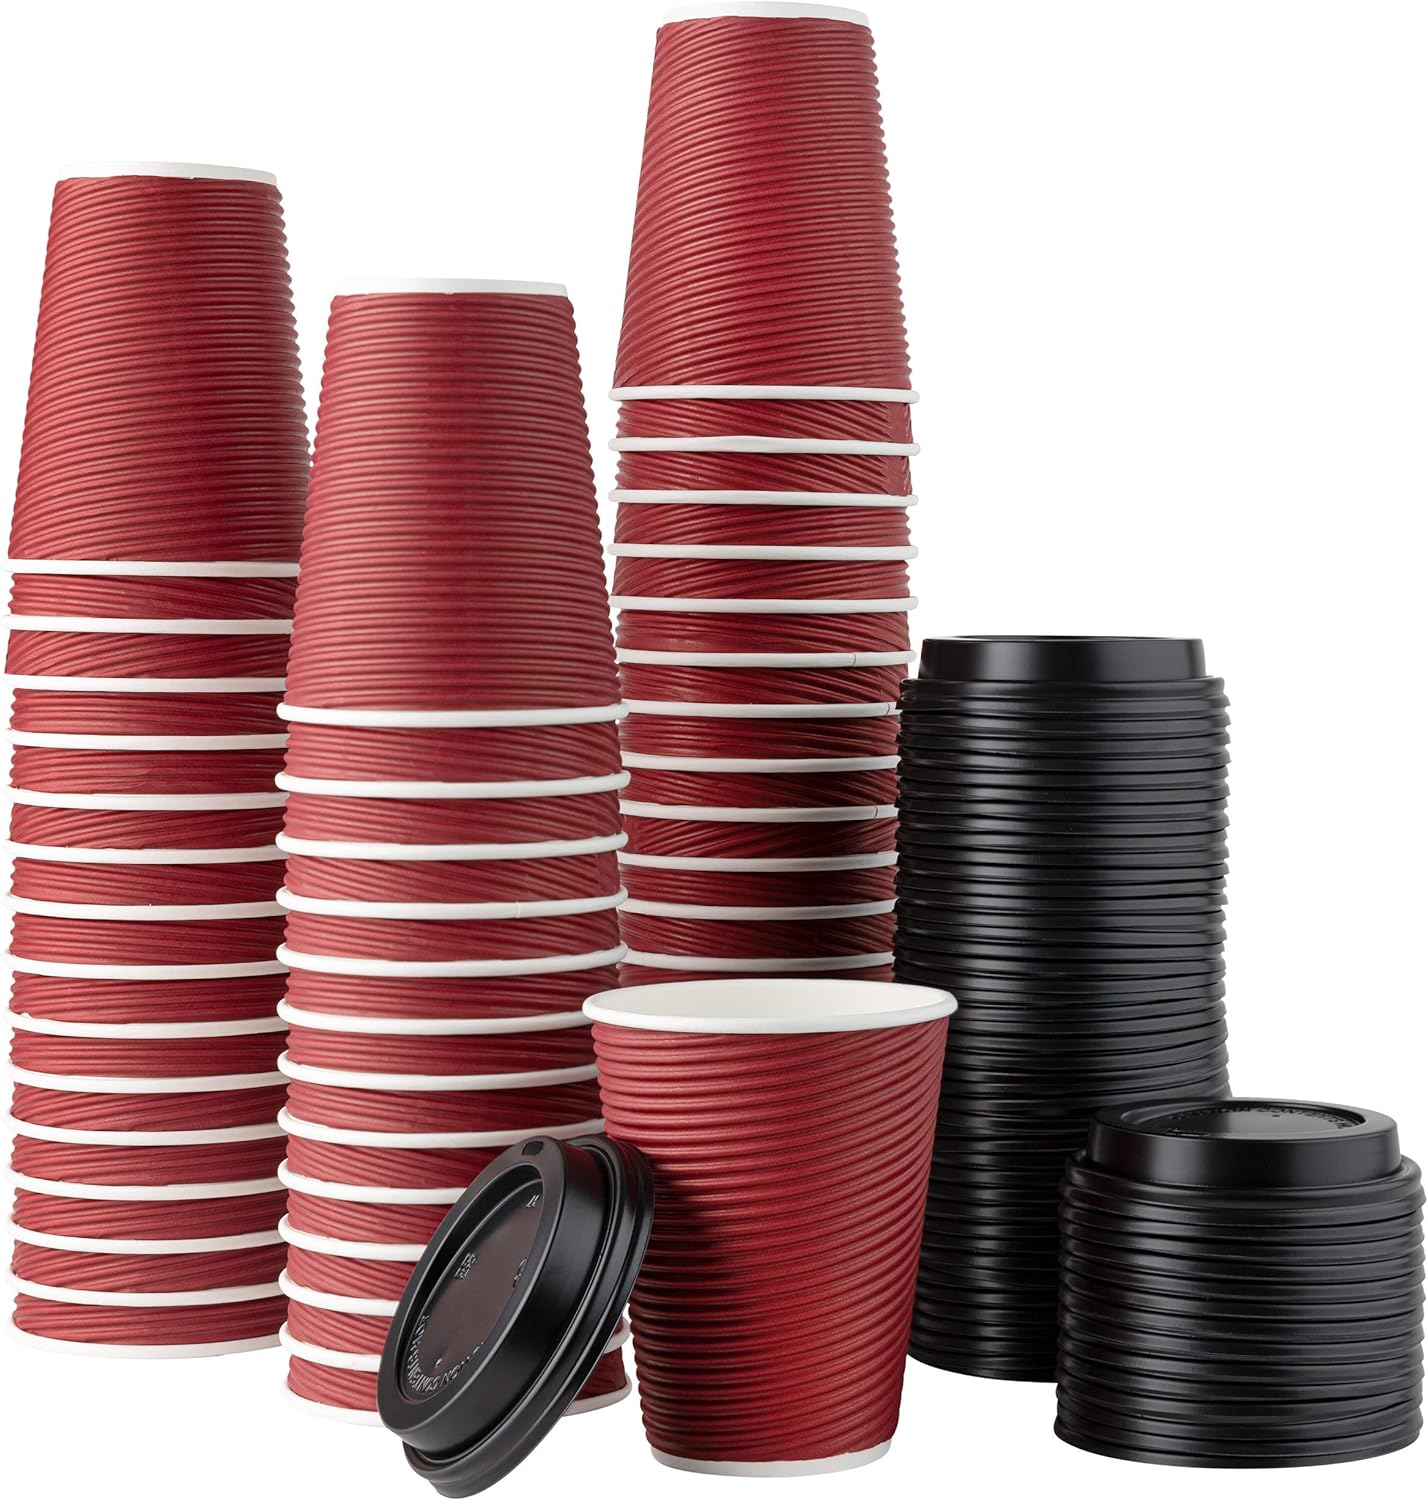 PLASTICPRO [50 Sets - 12 oz.] Insulated Rippled Double Wall Paper Hot Coffee Cups With Lids, Burgundy